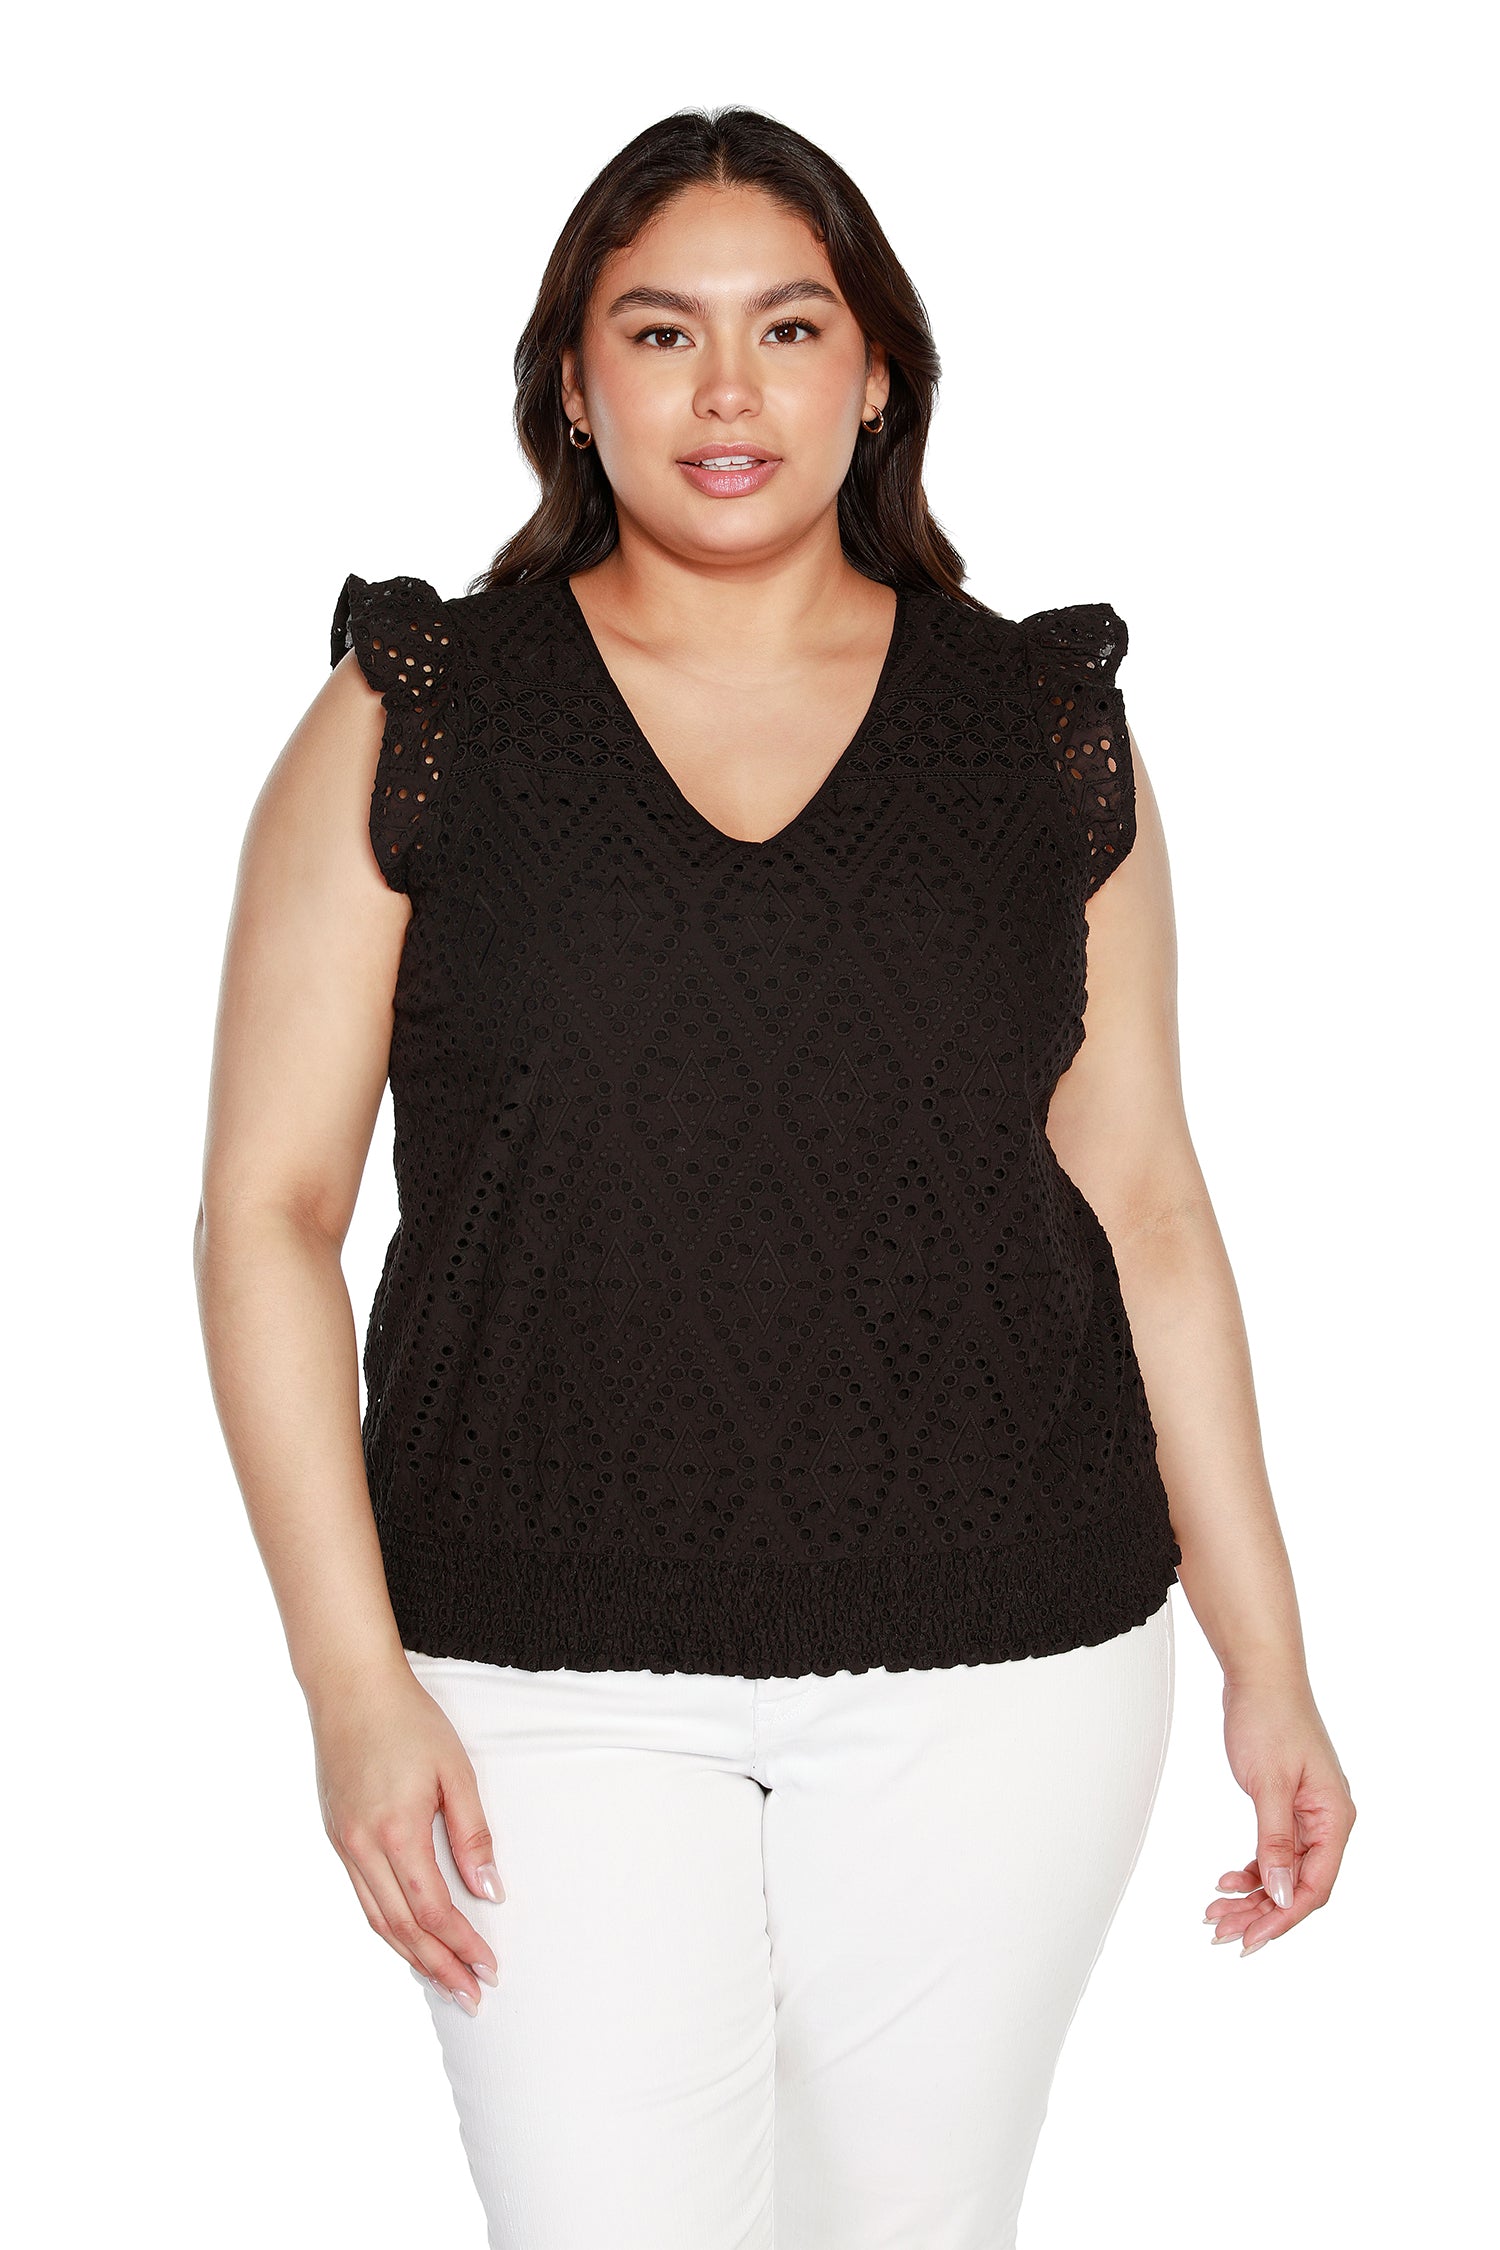 Women’s Eyelet Top with Flutter Sleeves and Smocked Waist  | Curvy